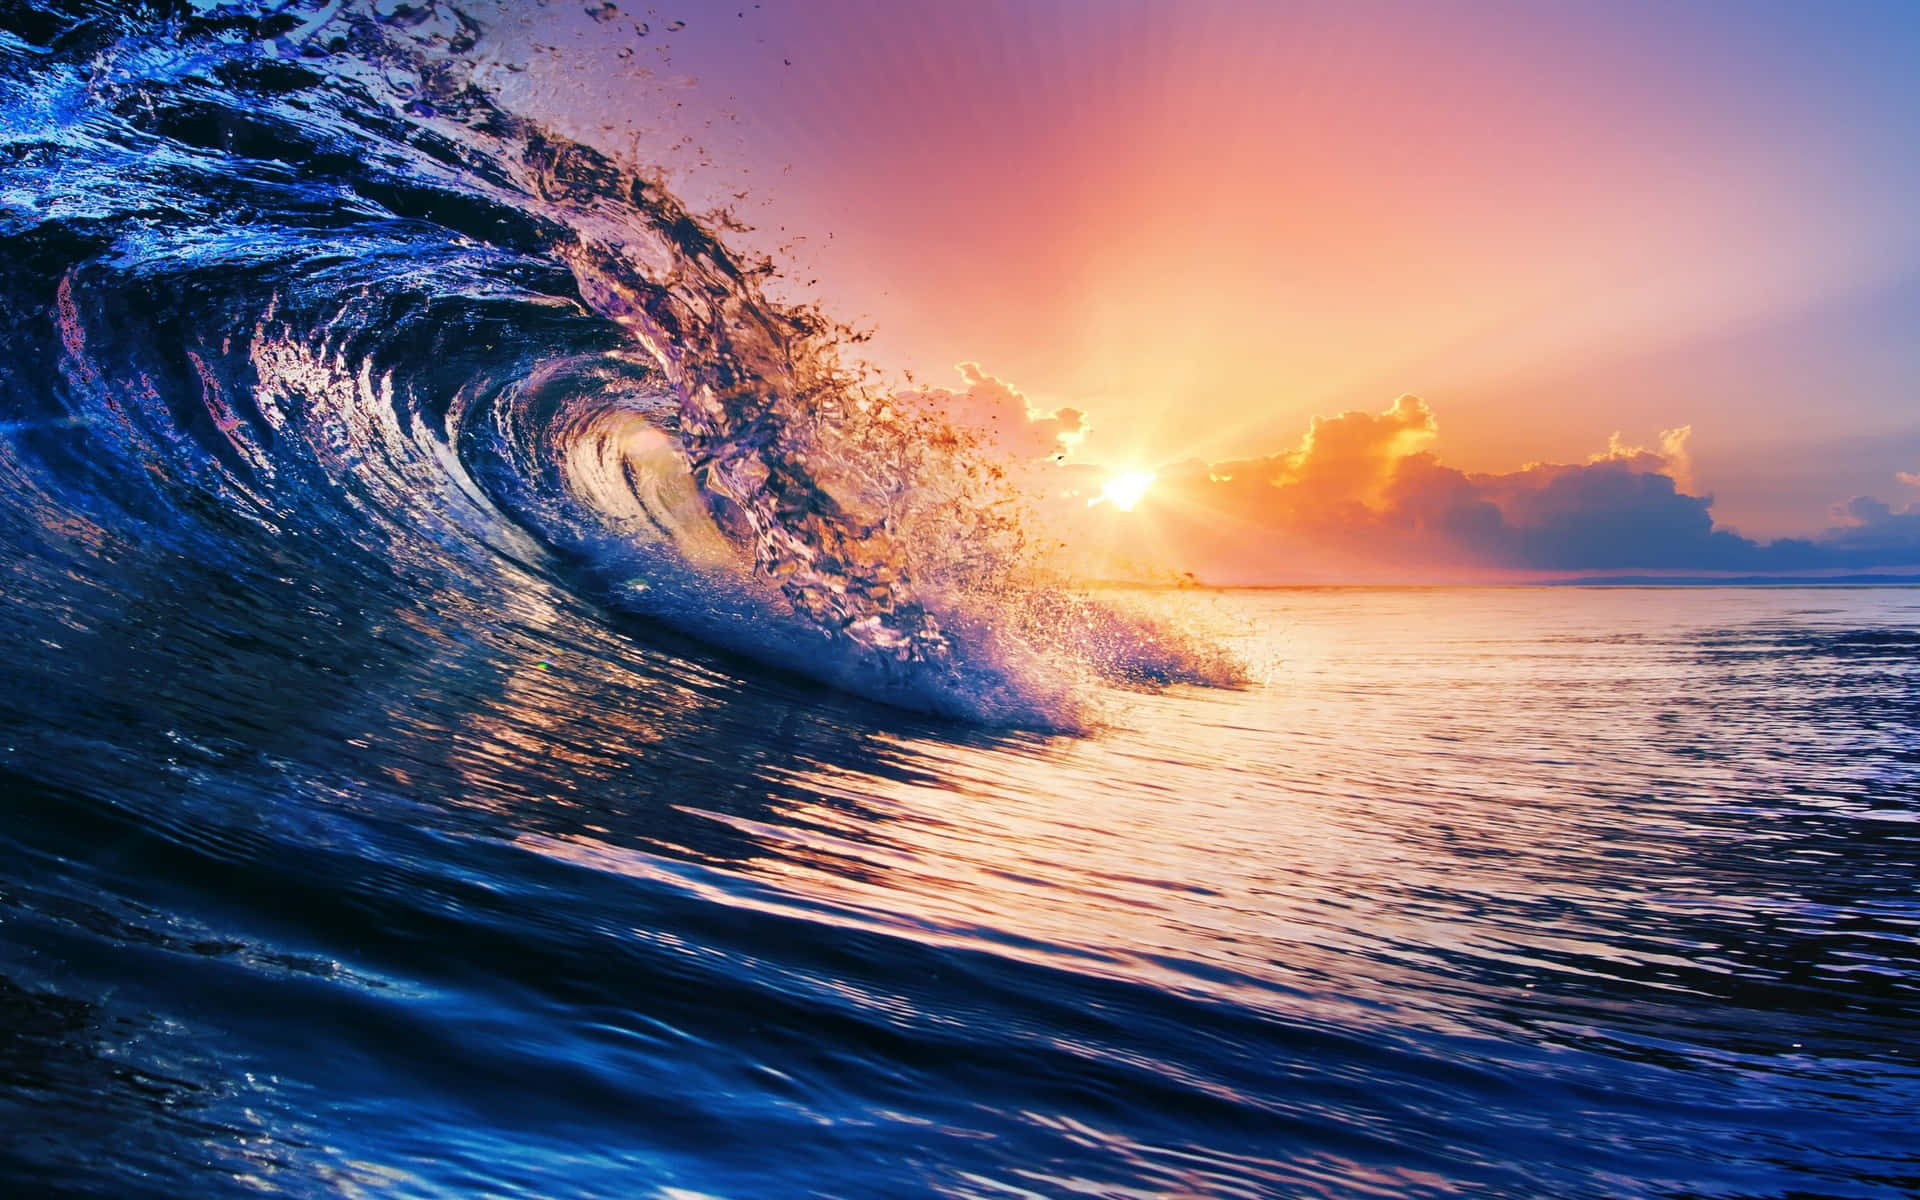 Find relief in a wave of relaxation